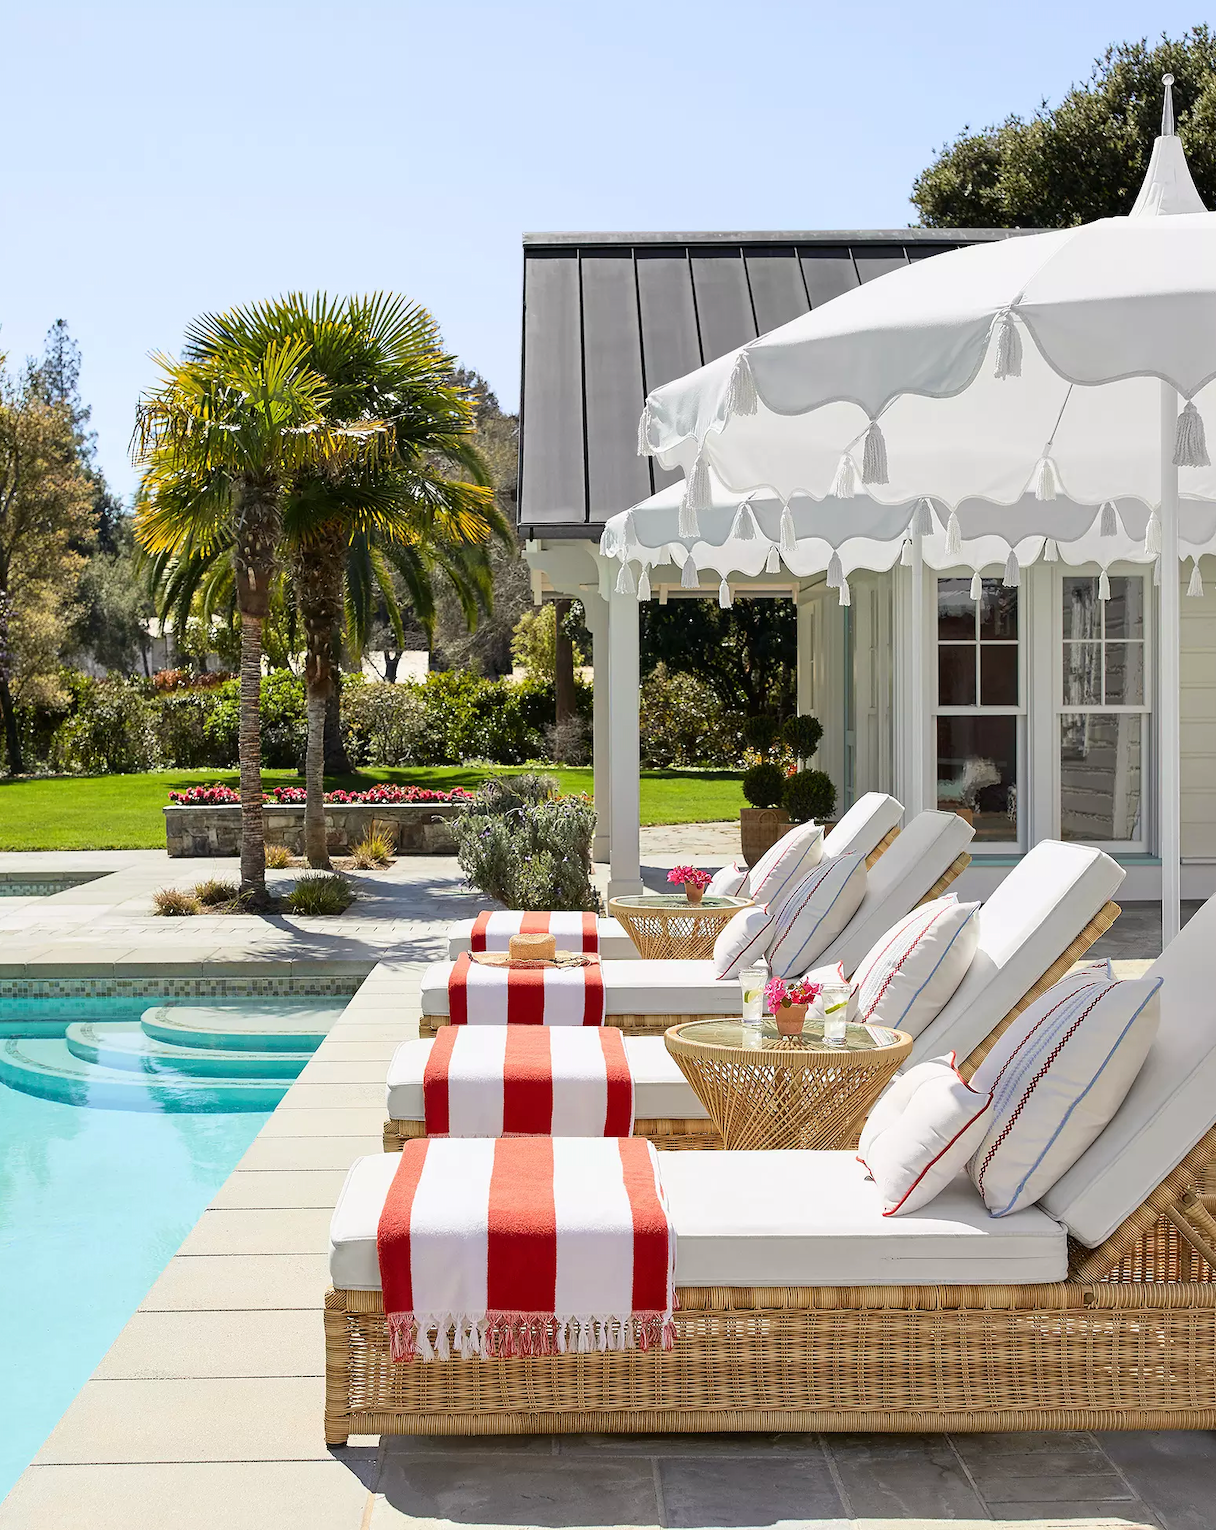 Calling All Homeowners With Pools: You Need These Gorgeous Chaises